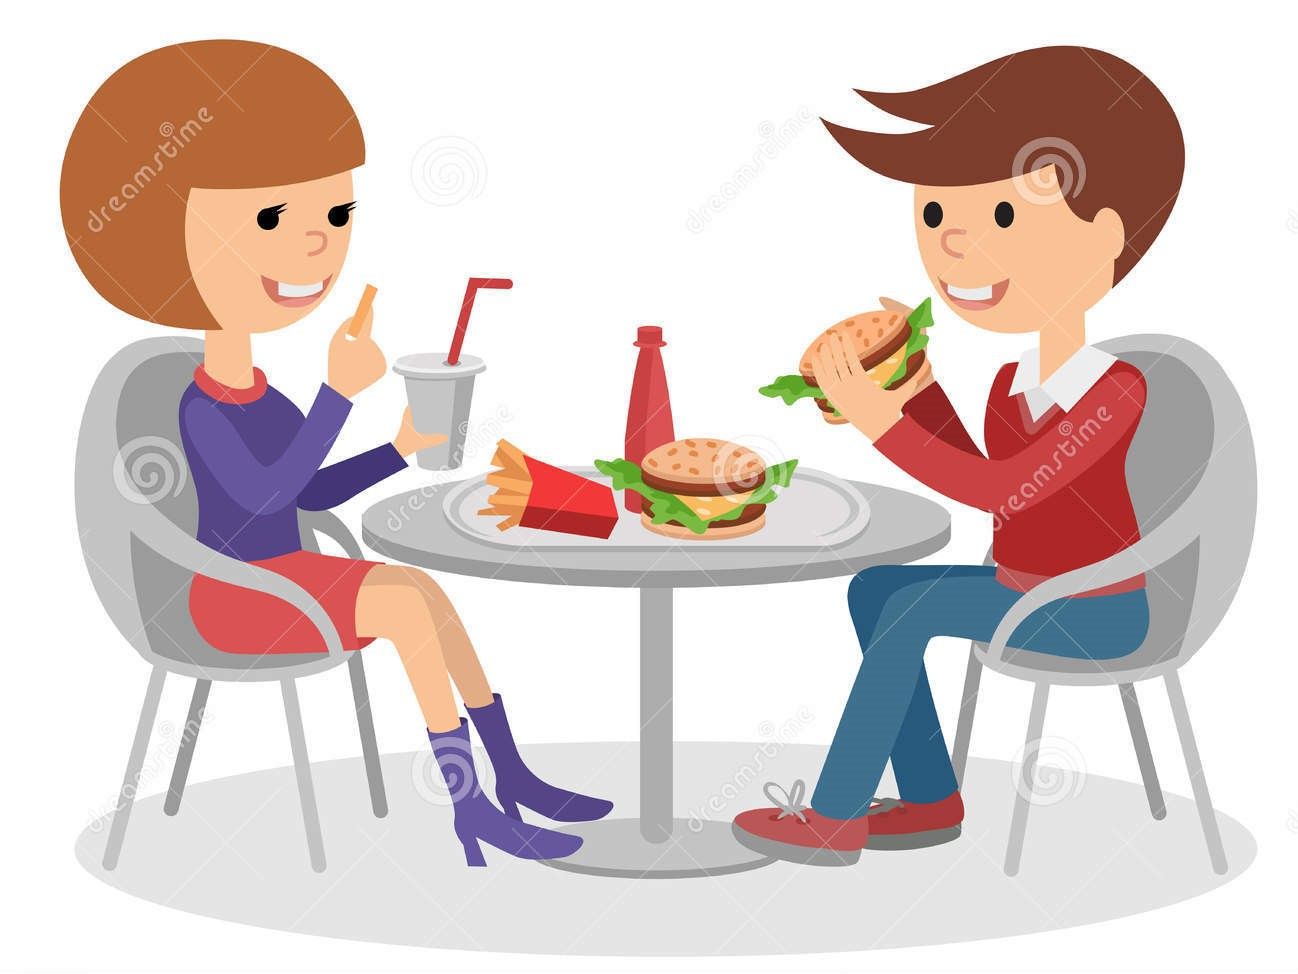 girl-boy-eating-fast-food-vector-illustration-people-table-sandwiches-drinks-friends-lunch-sitting-isolated-83546218.jpg